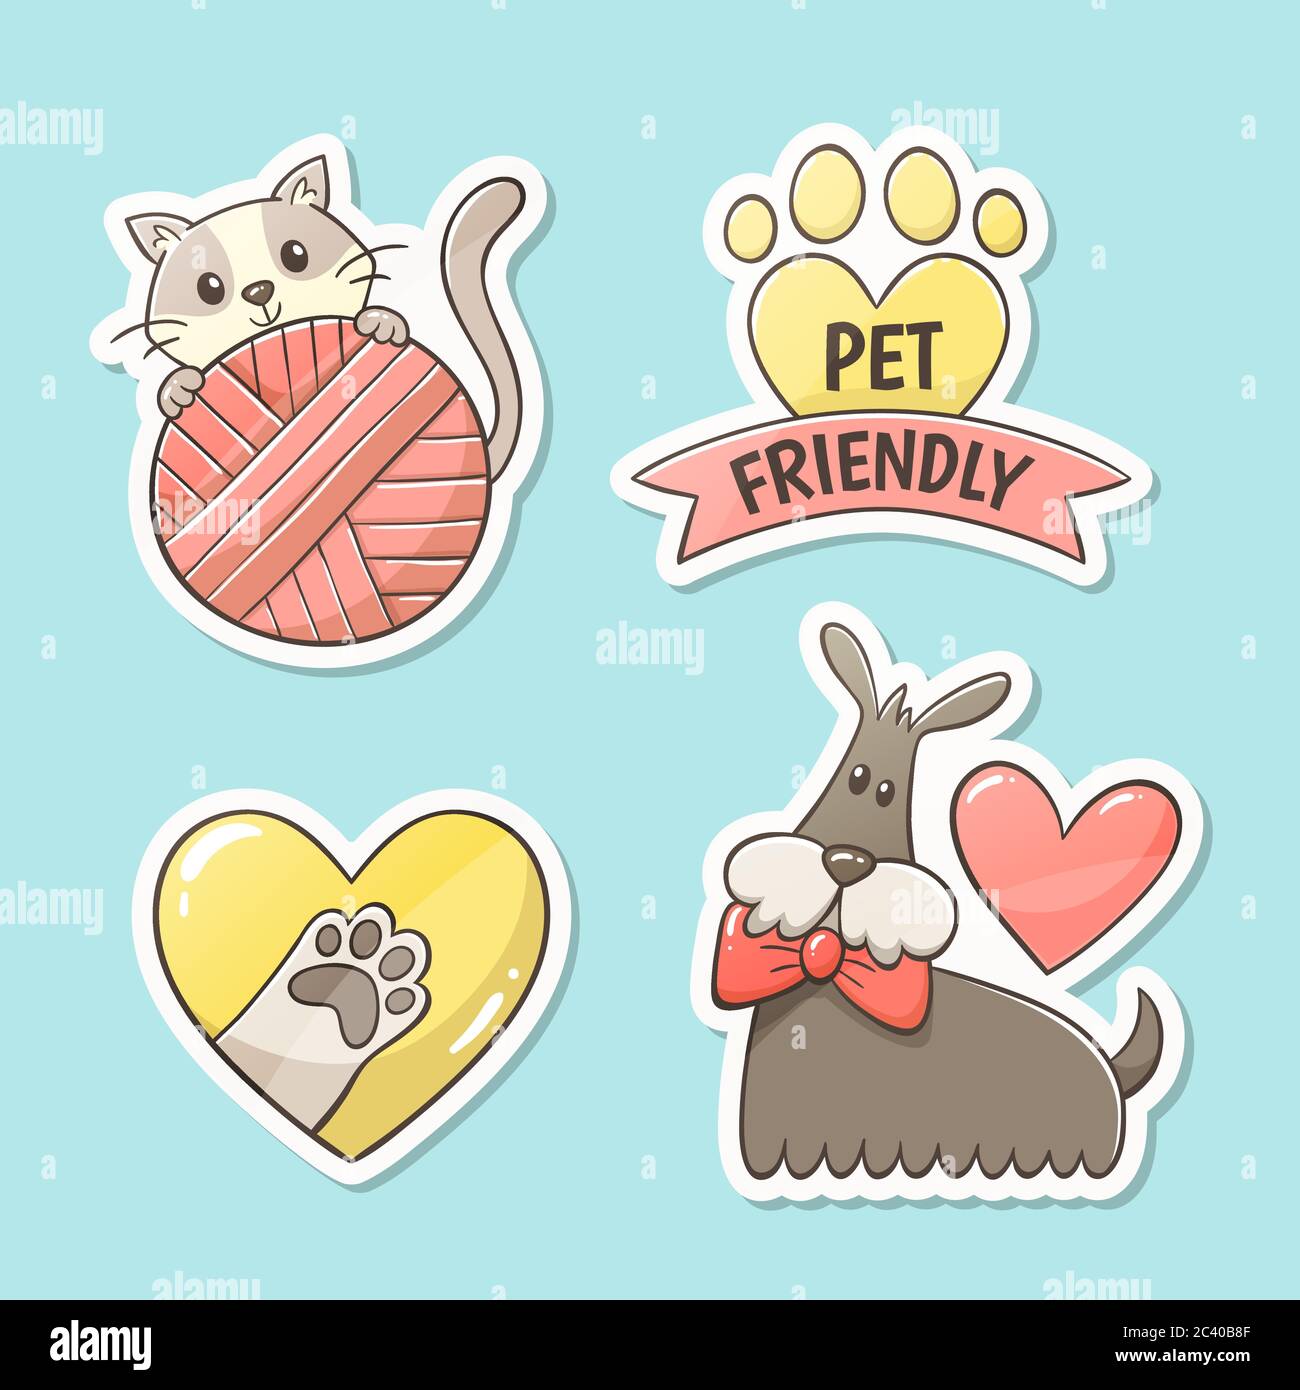 Pet friendly stickers. Hand-drawn cute label designs. Perfect for greeting cards, t-shirts, decorative elements, and pet design products. Stock Vector